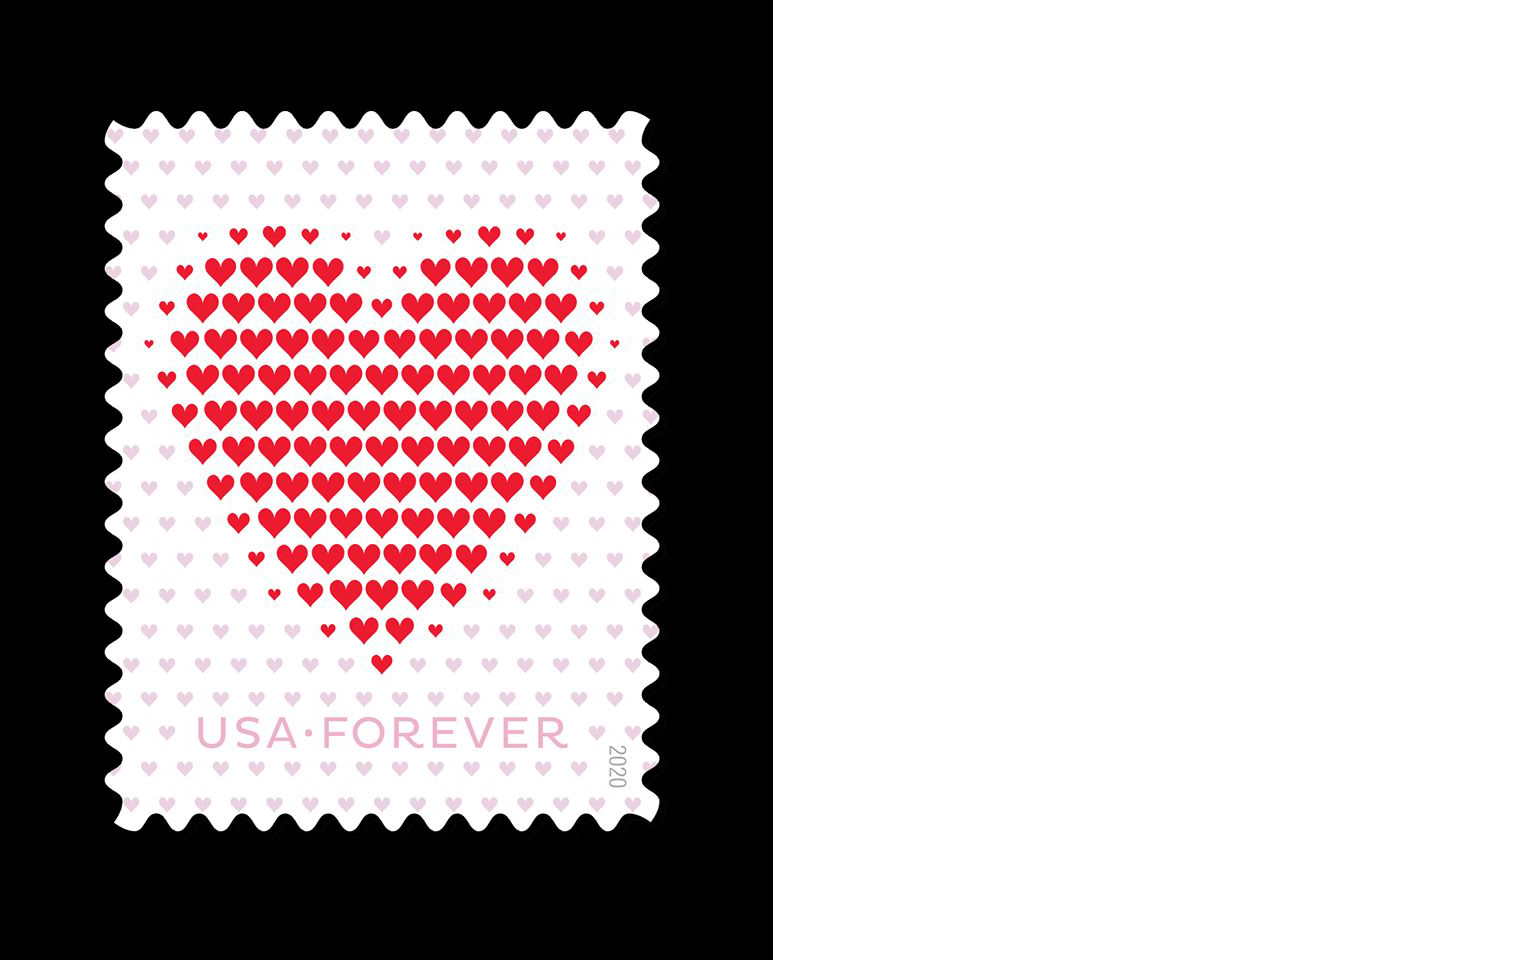 USPS releases the Made of Hearts love stamp Studio A Studio A